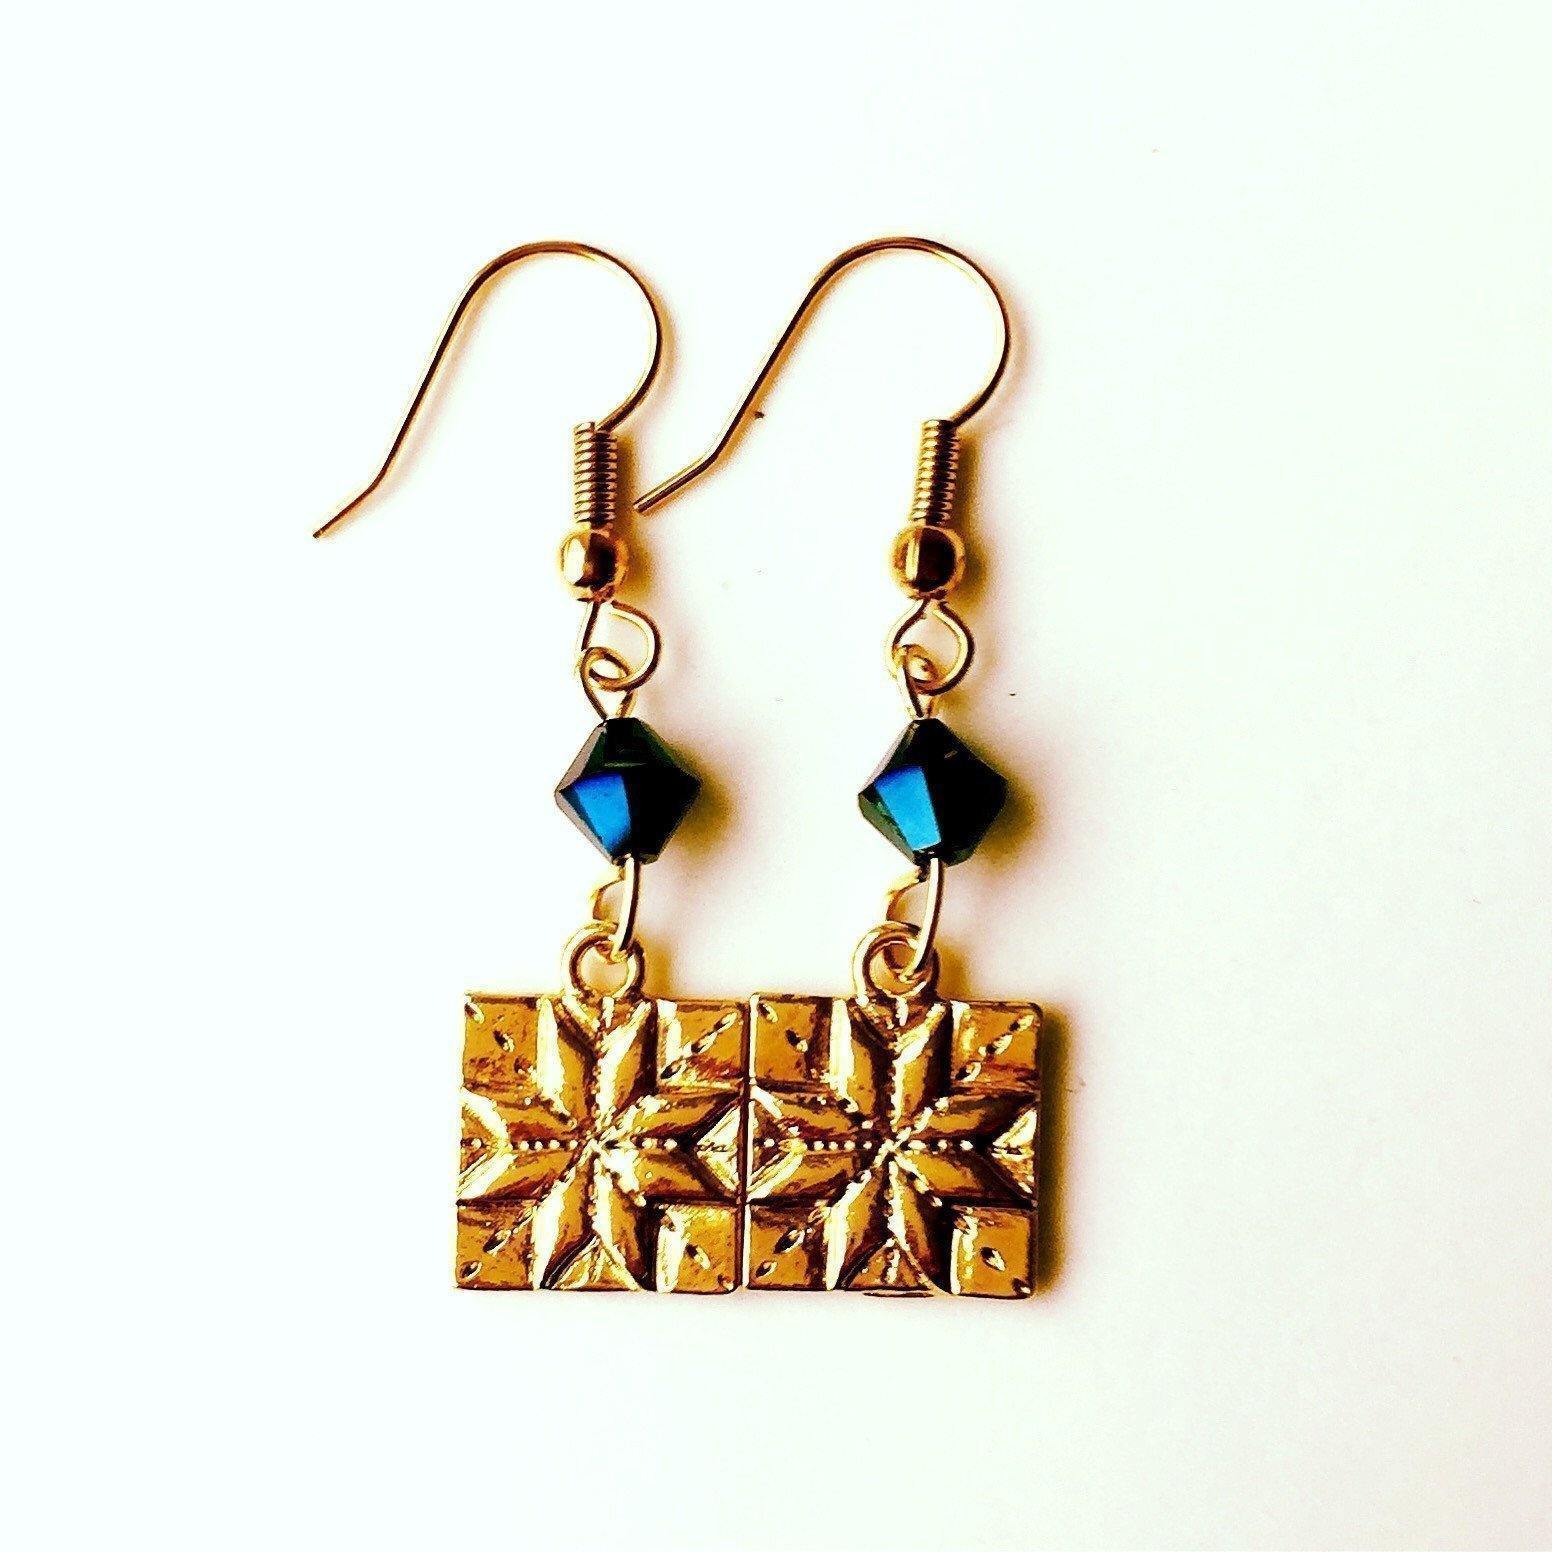 Quilt Patch Gold Earrings with Blue Swarovski Crystals